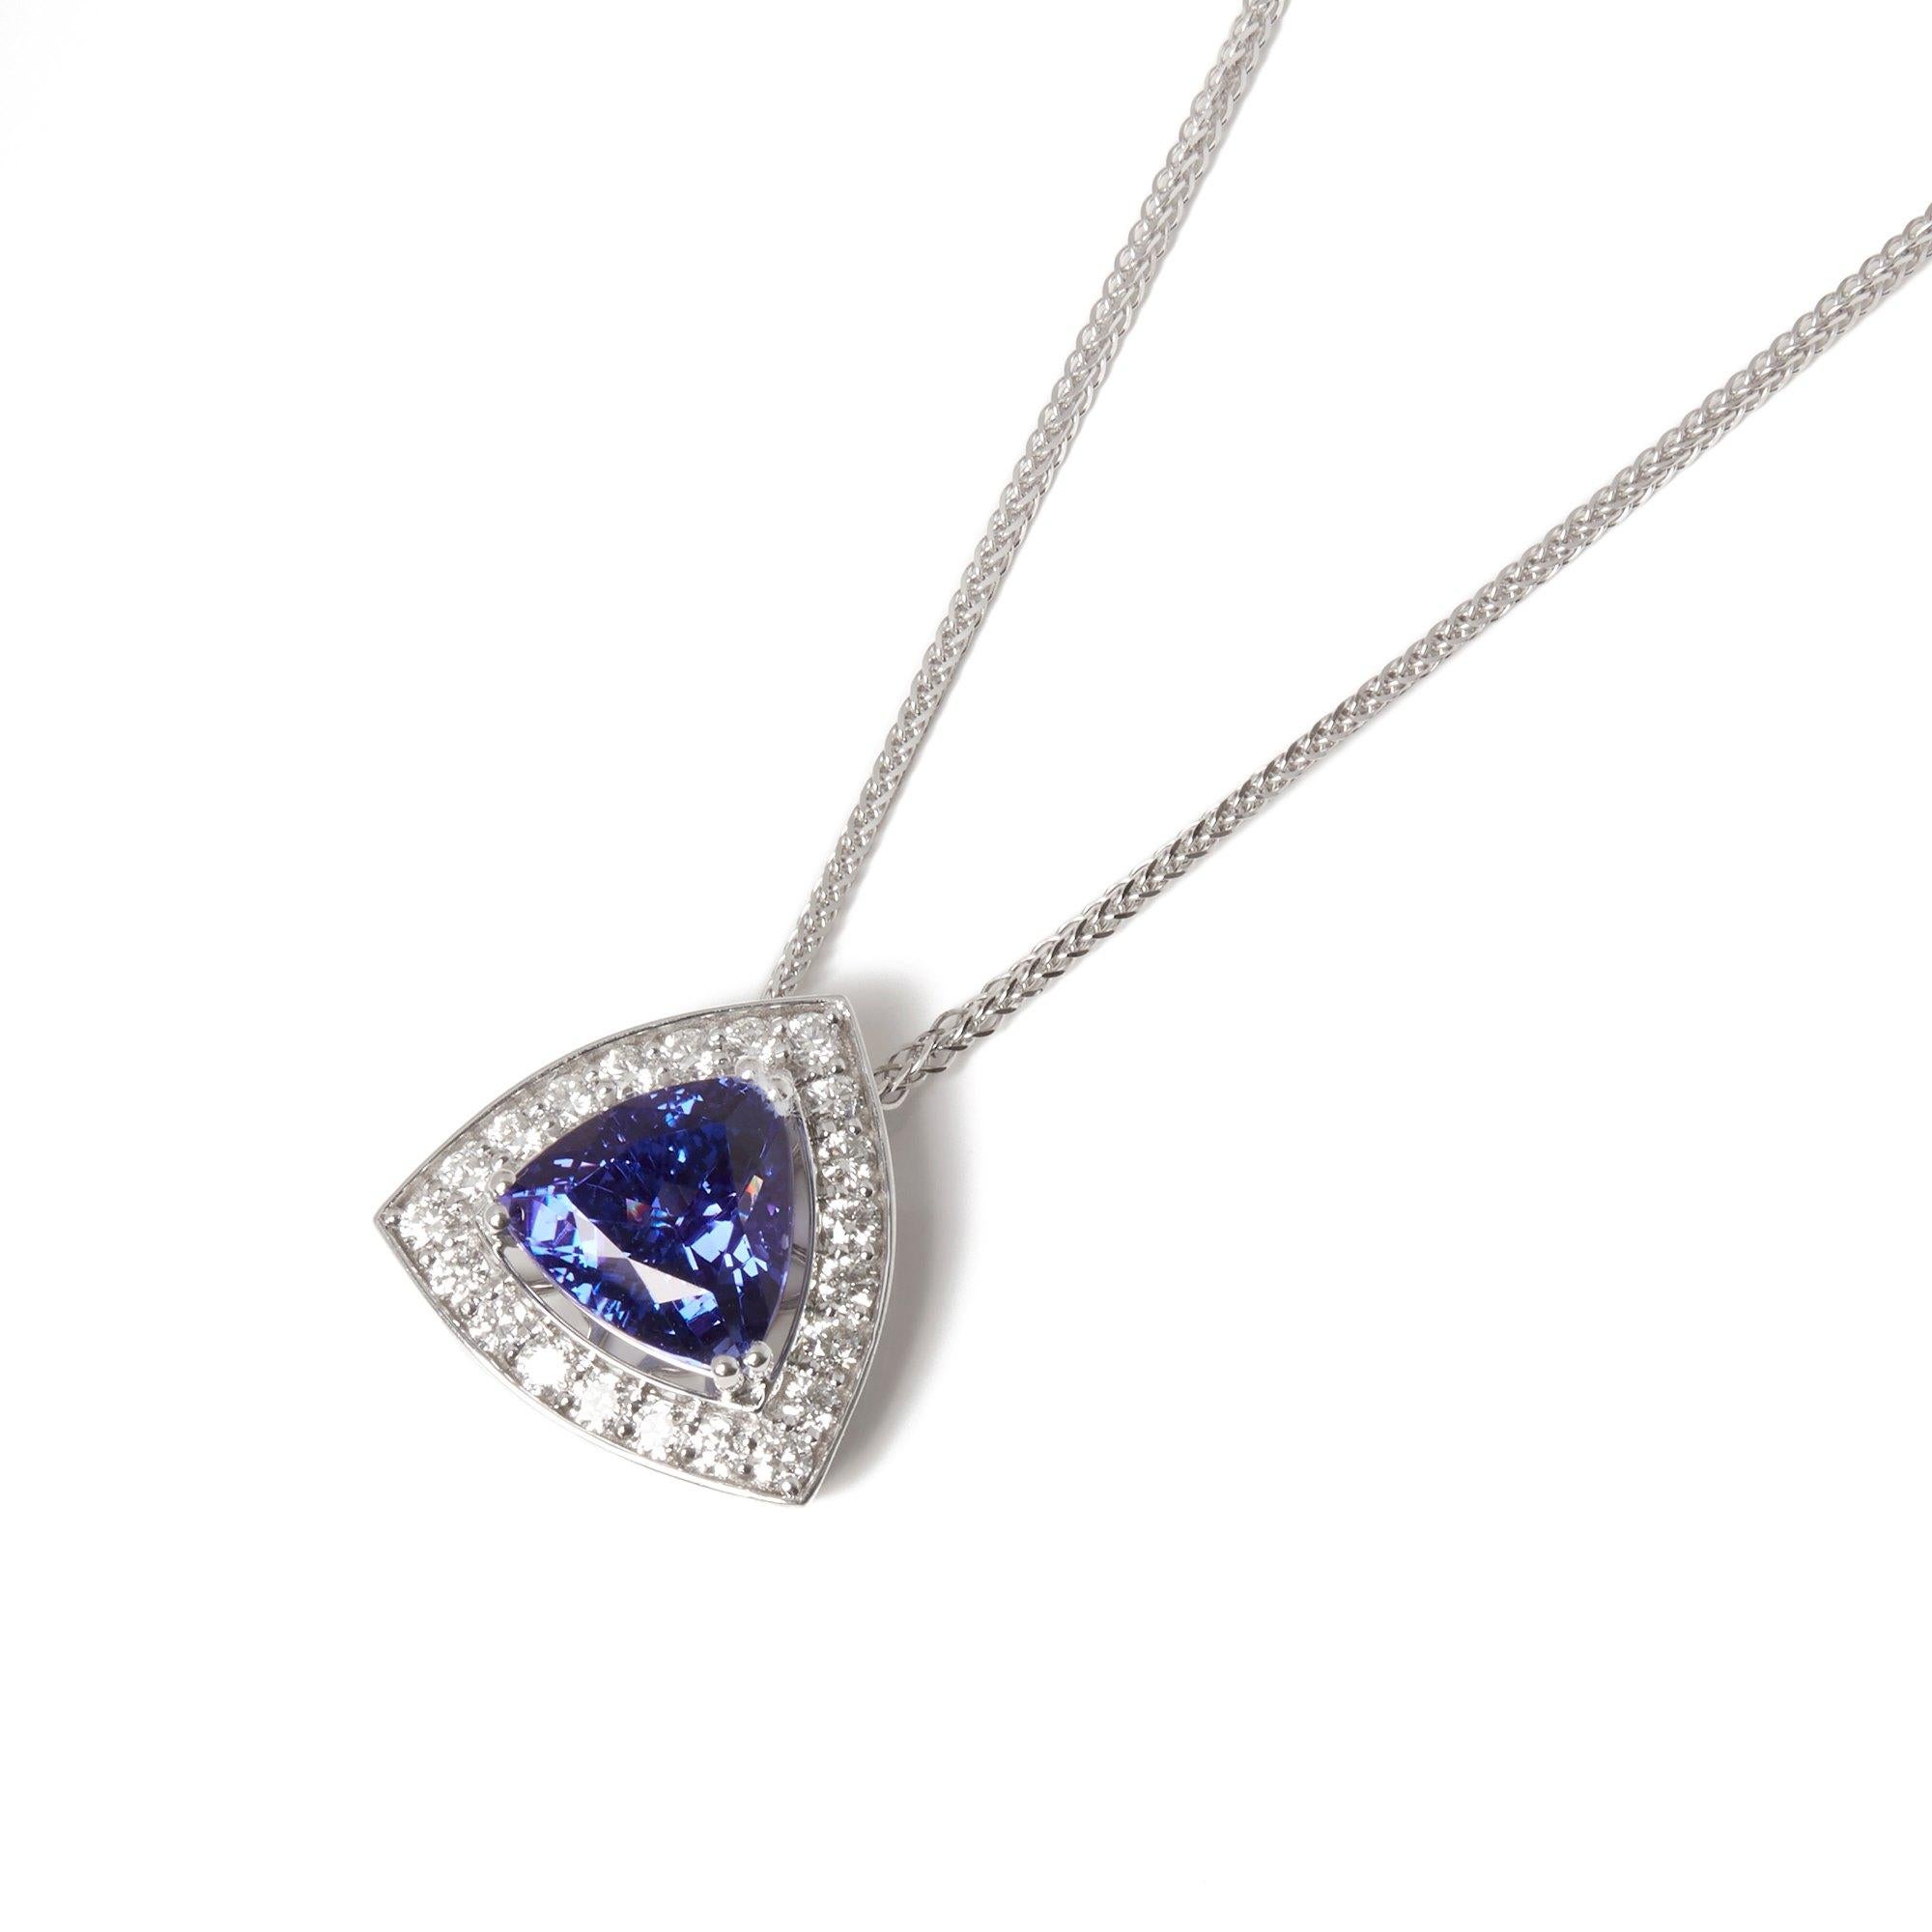 This Pendant Designed by David Jerome is from his Private Collection and features One Trilliant Cut Tanzanite Totalling 13.86cts Sourced in the D Block Mine Tanzania. Set with Round Brilliant Cut Diamonds Totalling 1.72cts Mounted in an 18k White